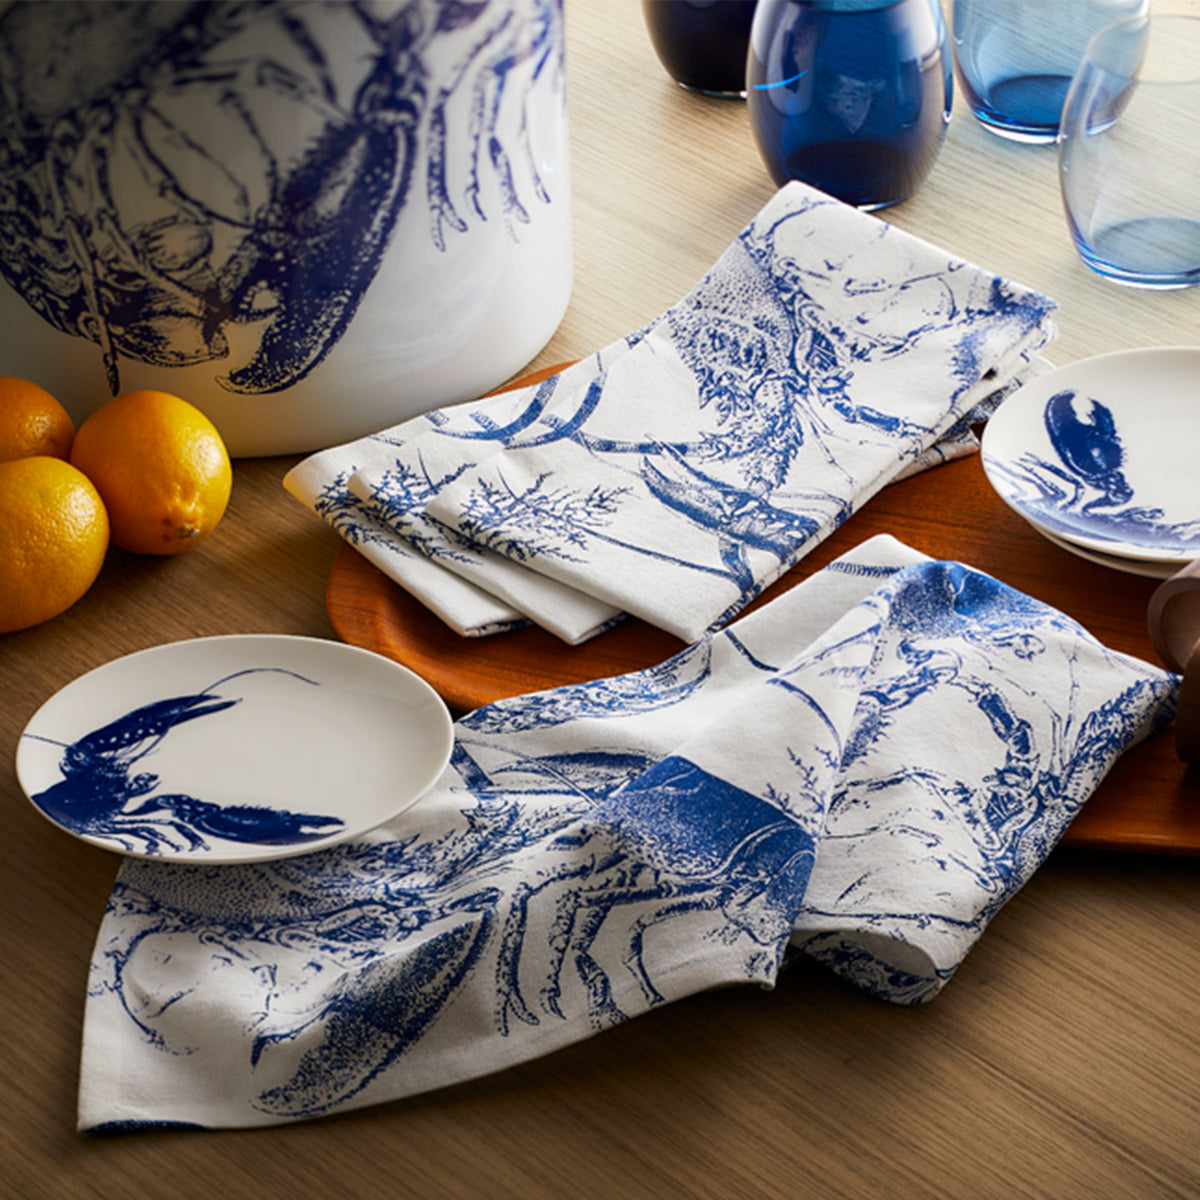 A table setting featuring heirloom-quality dinnerware, with Caskata Artisanal Home Lobster Small Plates, bowls, and napkins adorned with blue sea creature illustrations, a wooden tray, blue glasses, a large ceramic jar with a crab design reminiscent of New England&#39;s coast, and a few oranges.